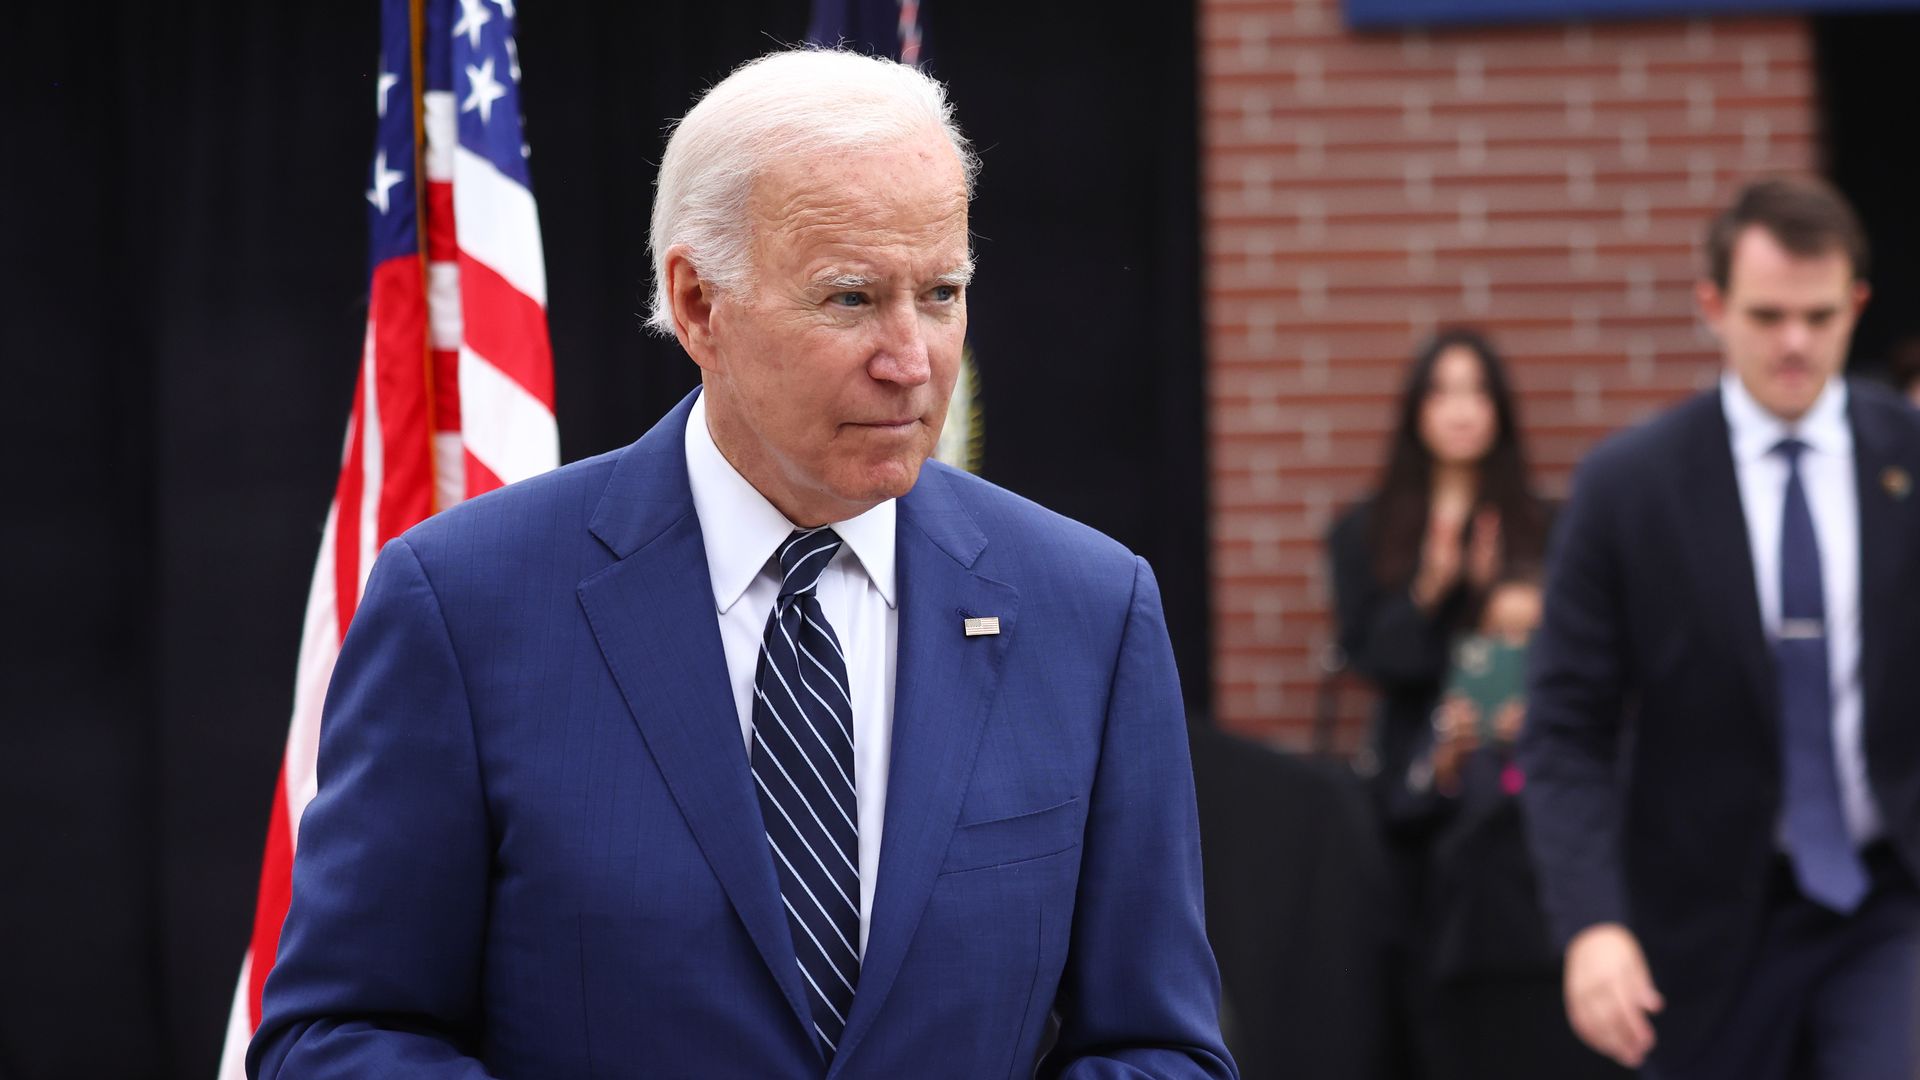 President Joe Biden walks from the podium after delivering remarks on lowering costs for American families at Irvine Valley College in Orange County on October 14, 2022 in Irvine, California